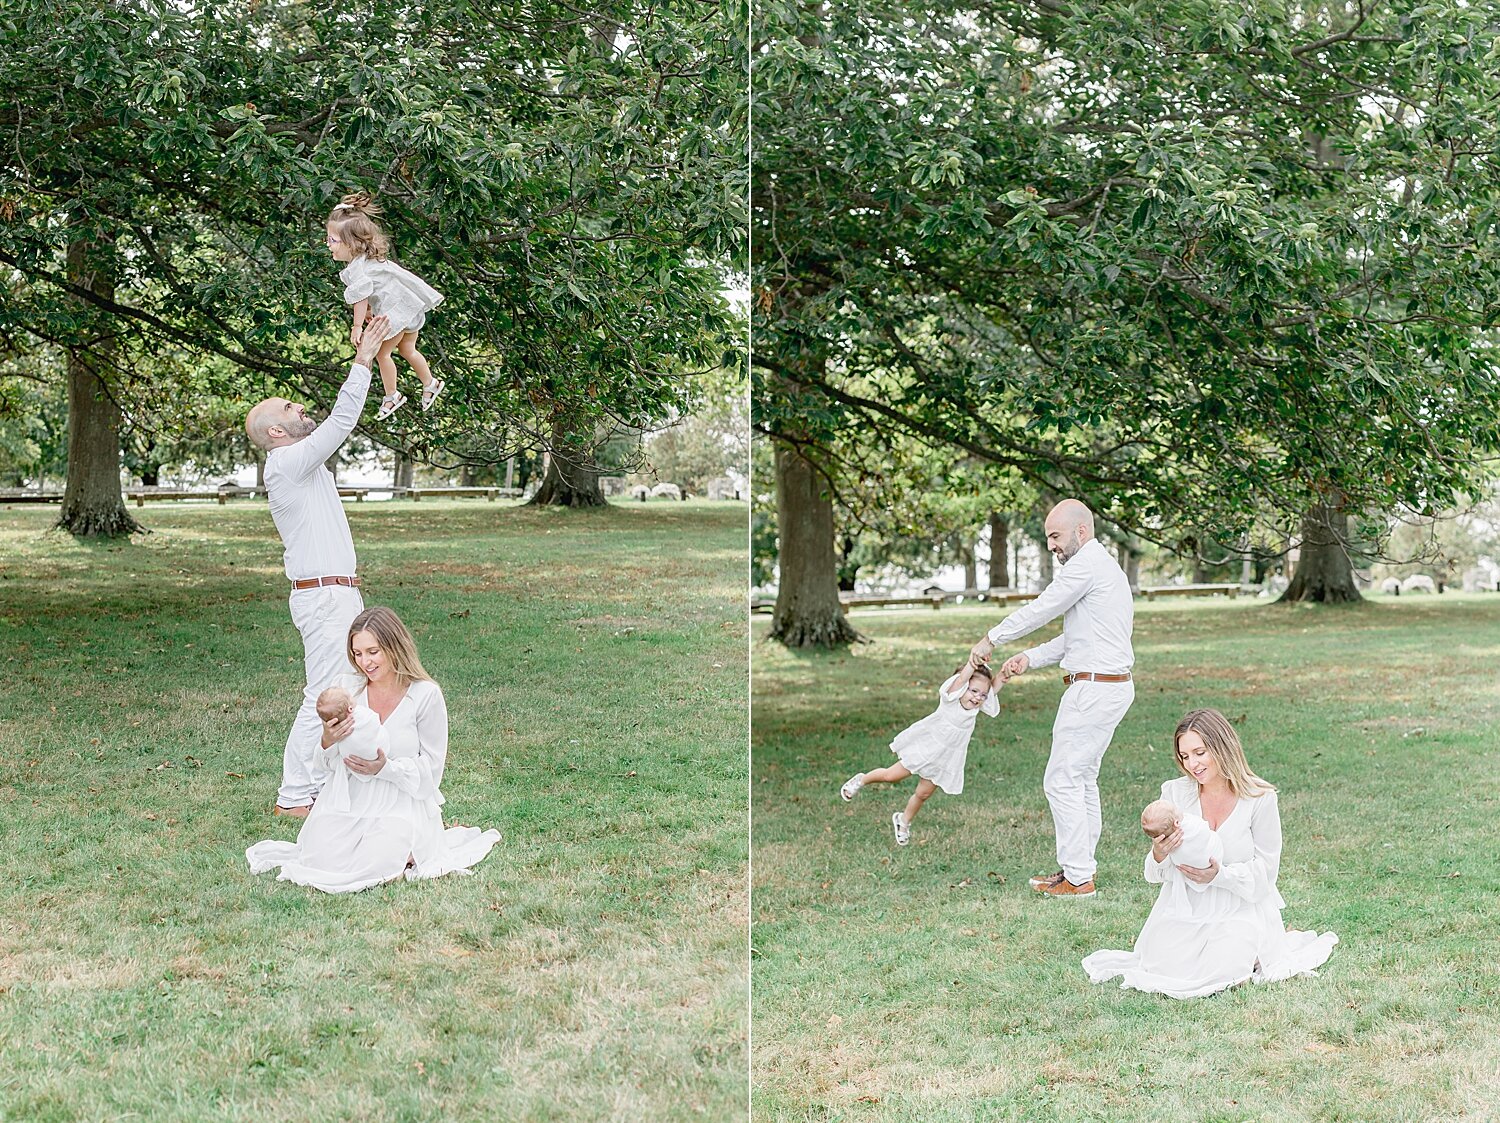 Parents playing in the park at Sherwood Island with newborn son and toddler daughter. Photos by Kristin Wood Photography.